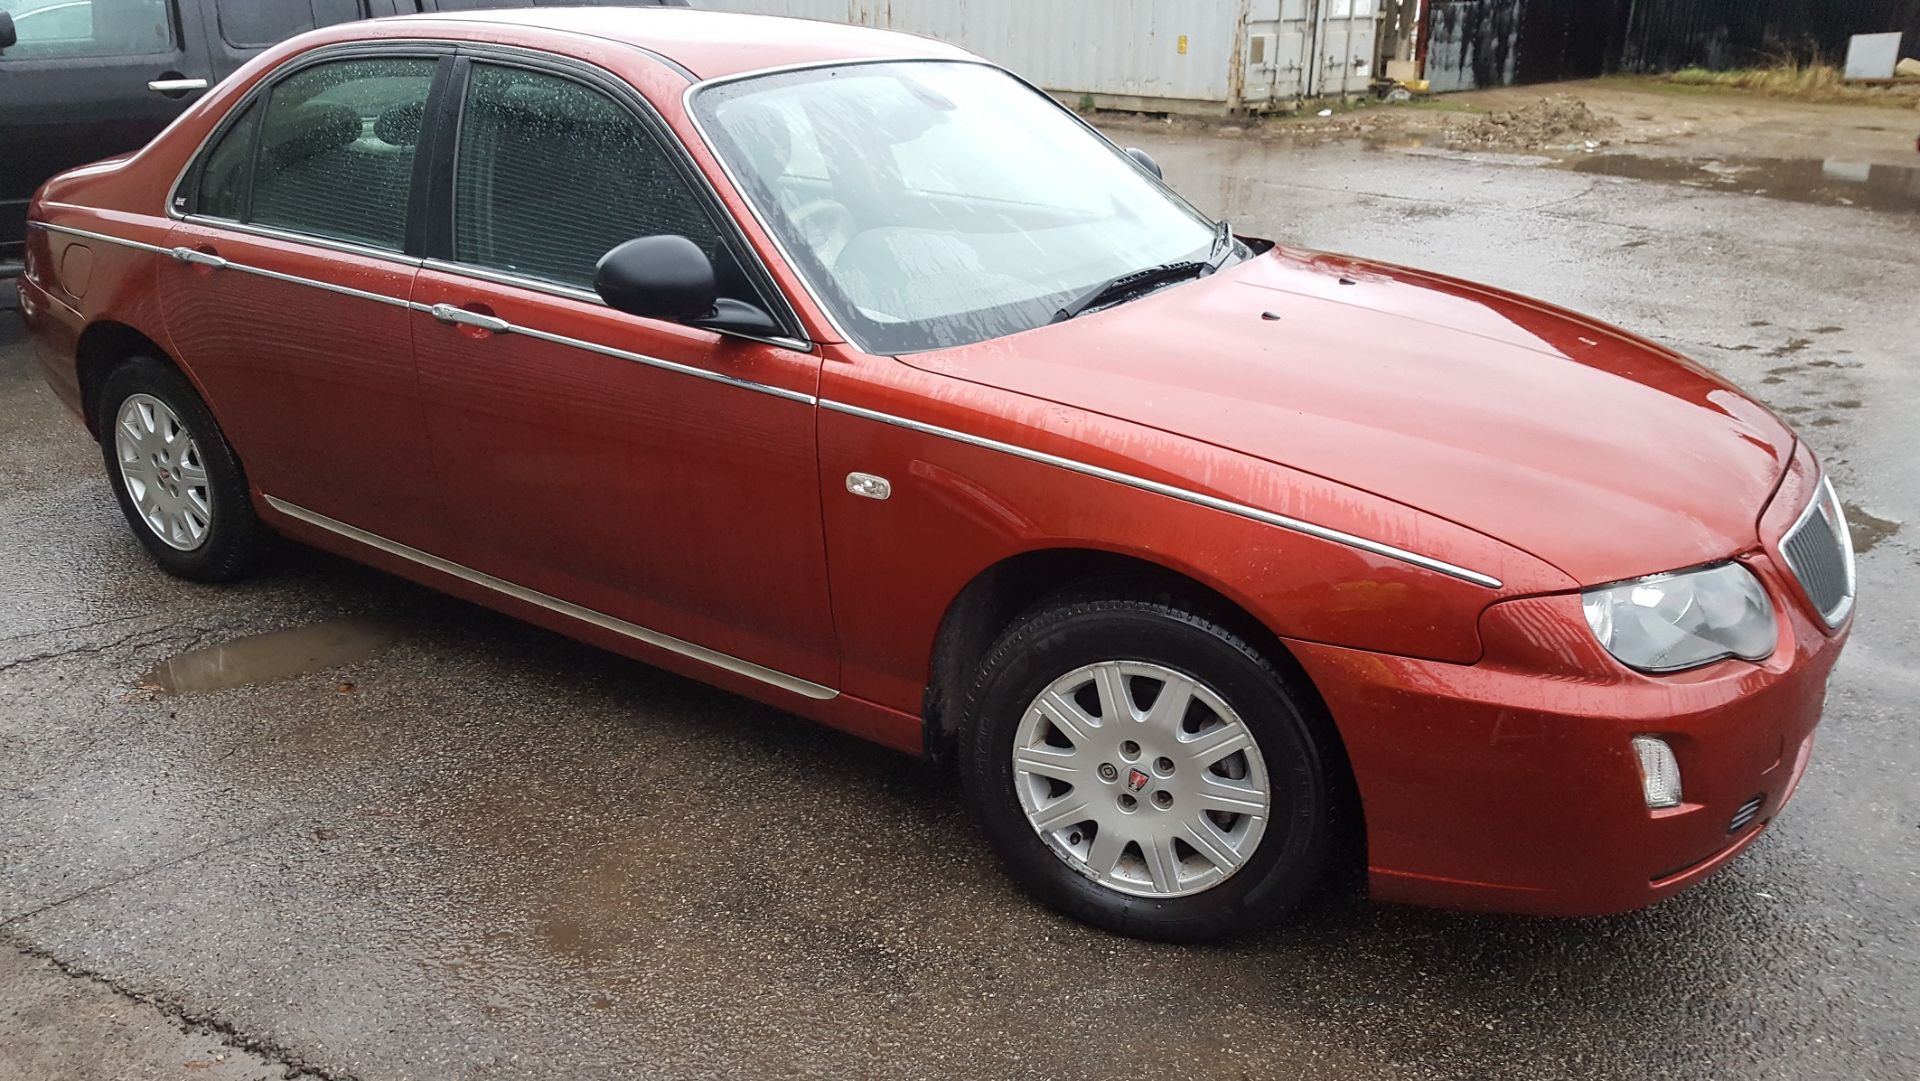 2004/54 REG ROVER 75 CLASSIC RED PETROL 4 DOOR SALOON, SHOWING 1 FORMER KEEPER *NO VAT* - Image 4 of 8